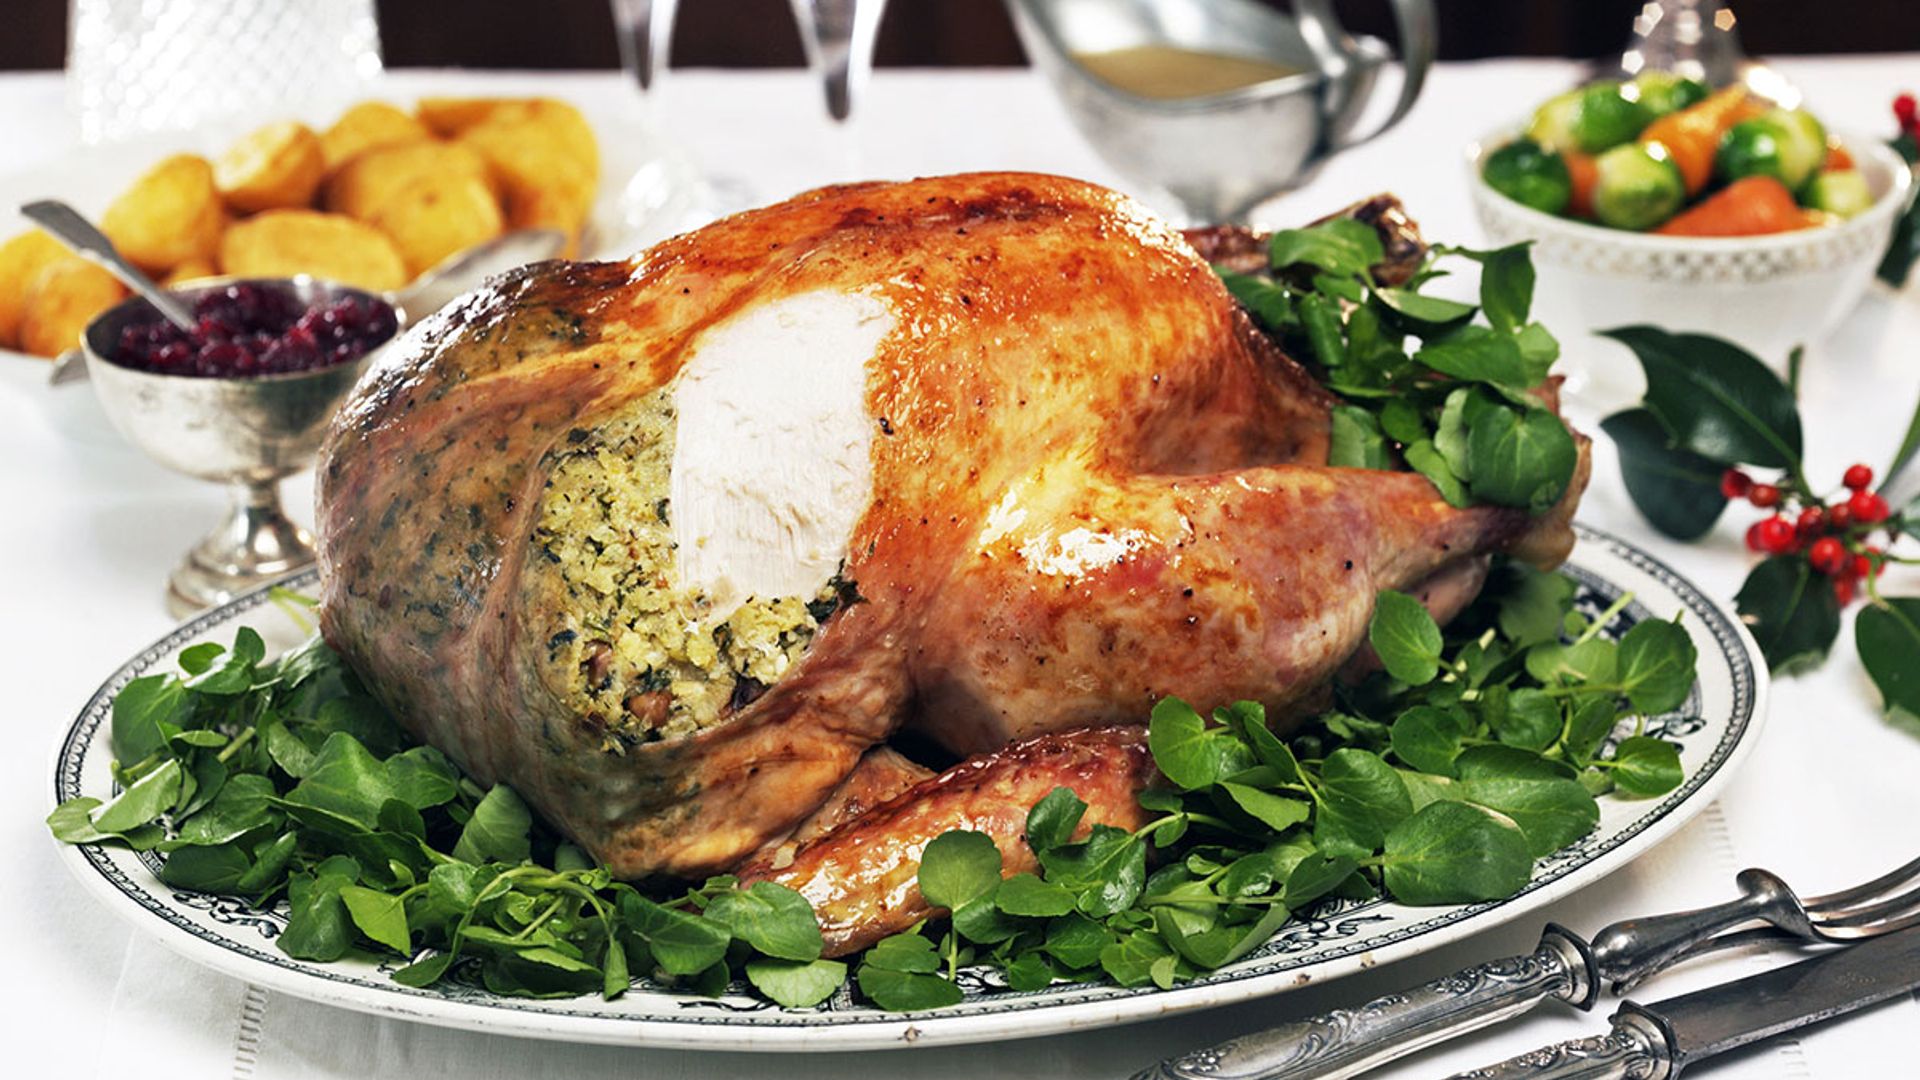 This roast Turkey recipe comes with the most delicious Christmas twist